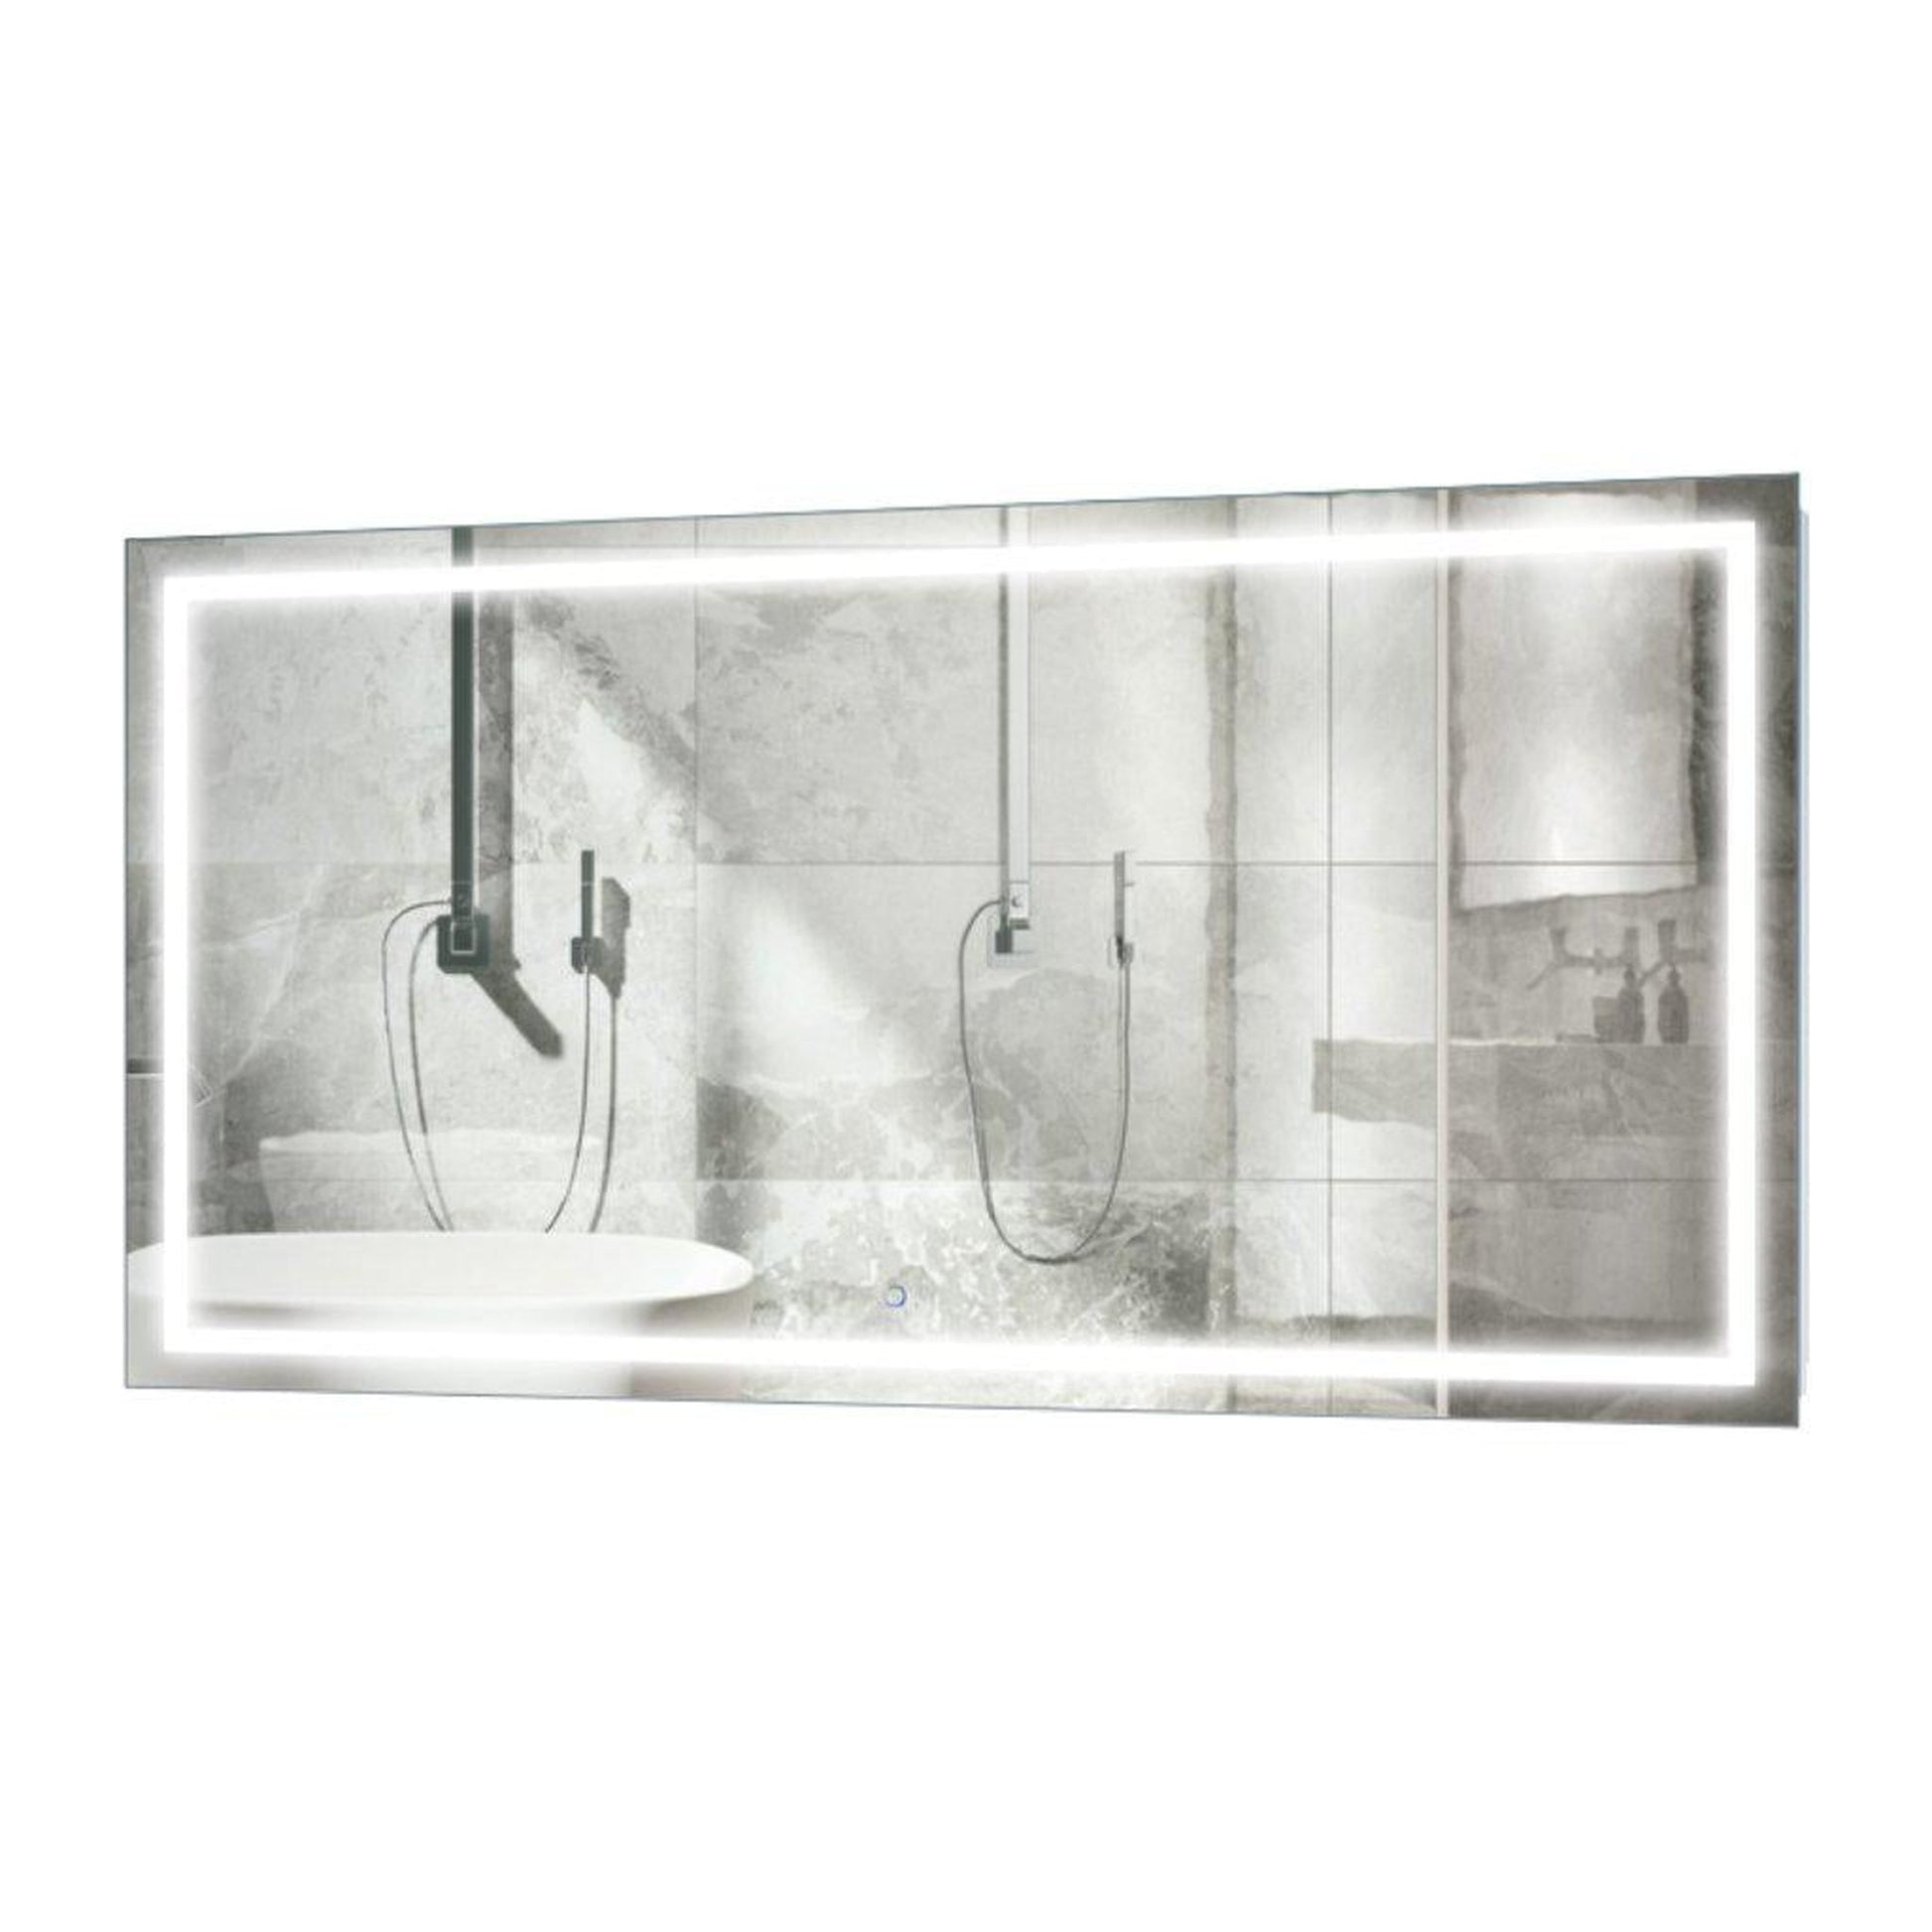 Krugg Reflections Icon 66” x 36” 5000K Rectangular Wall-Mounted Illuminated Silver Backed LED Mirror With Built-in Defogger and Touch Sensor On/Off Built-in Dimmer